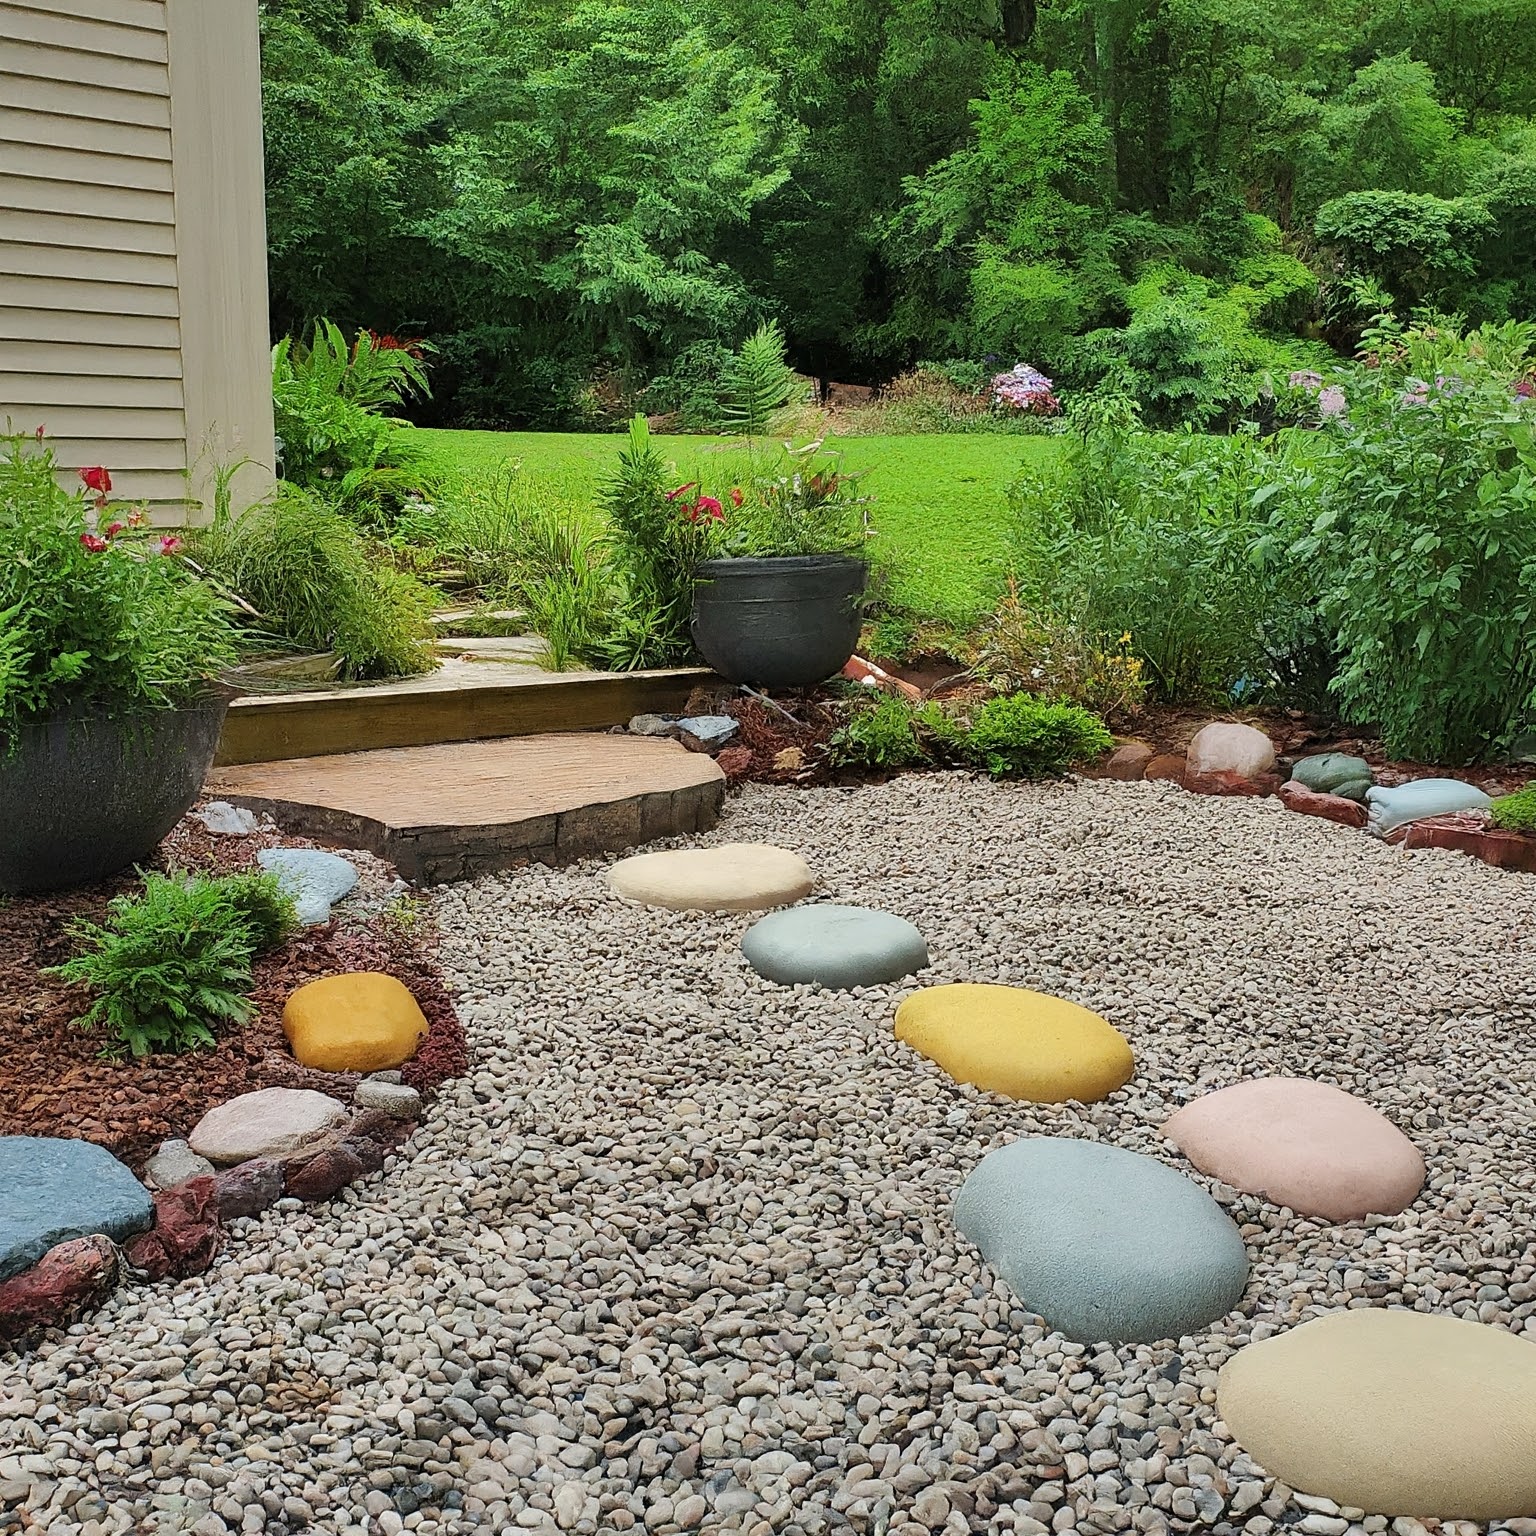 Make a Pea Gravel Patio Yourself -What Tools You May Need?